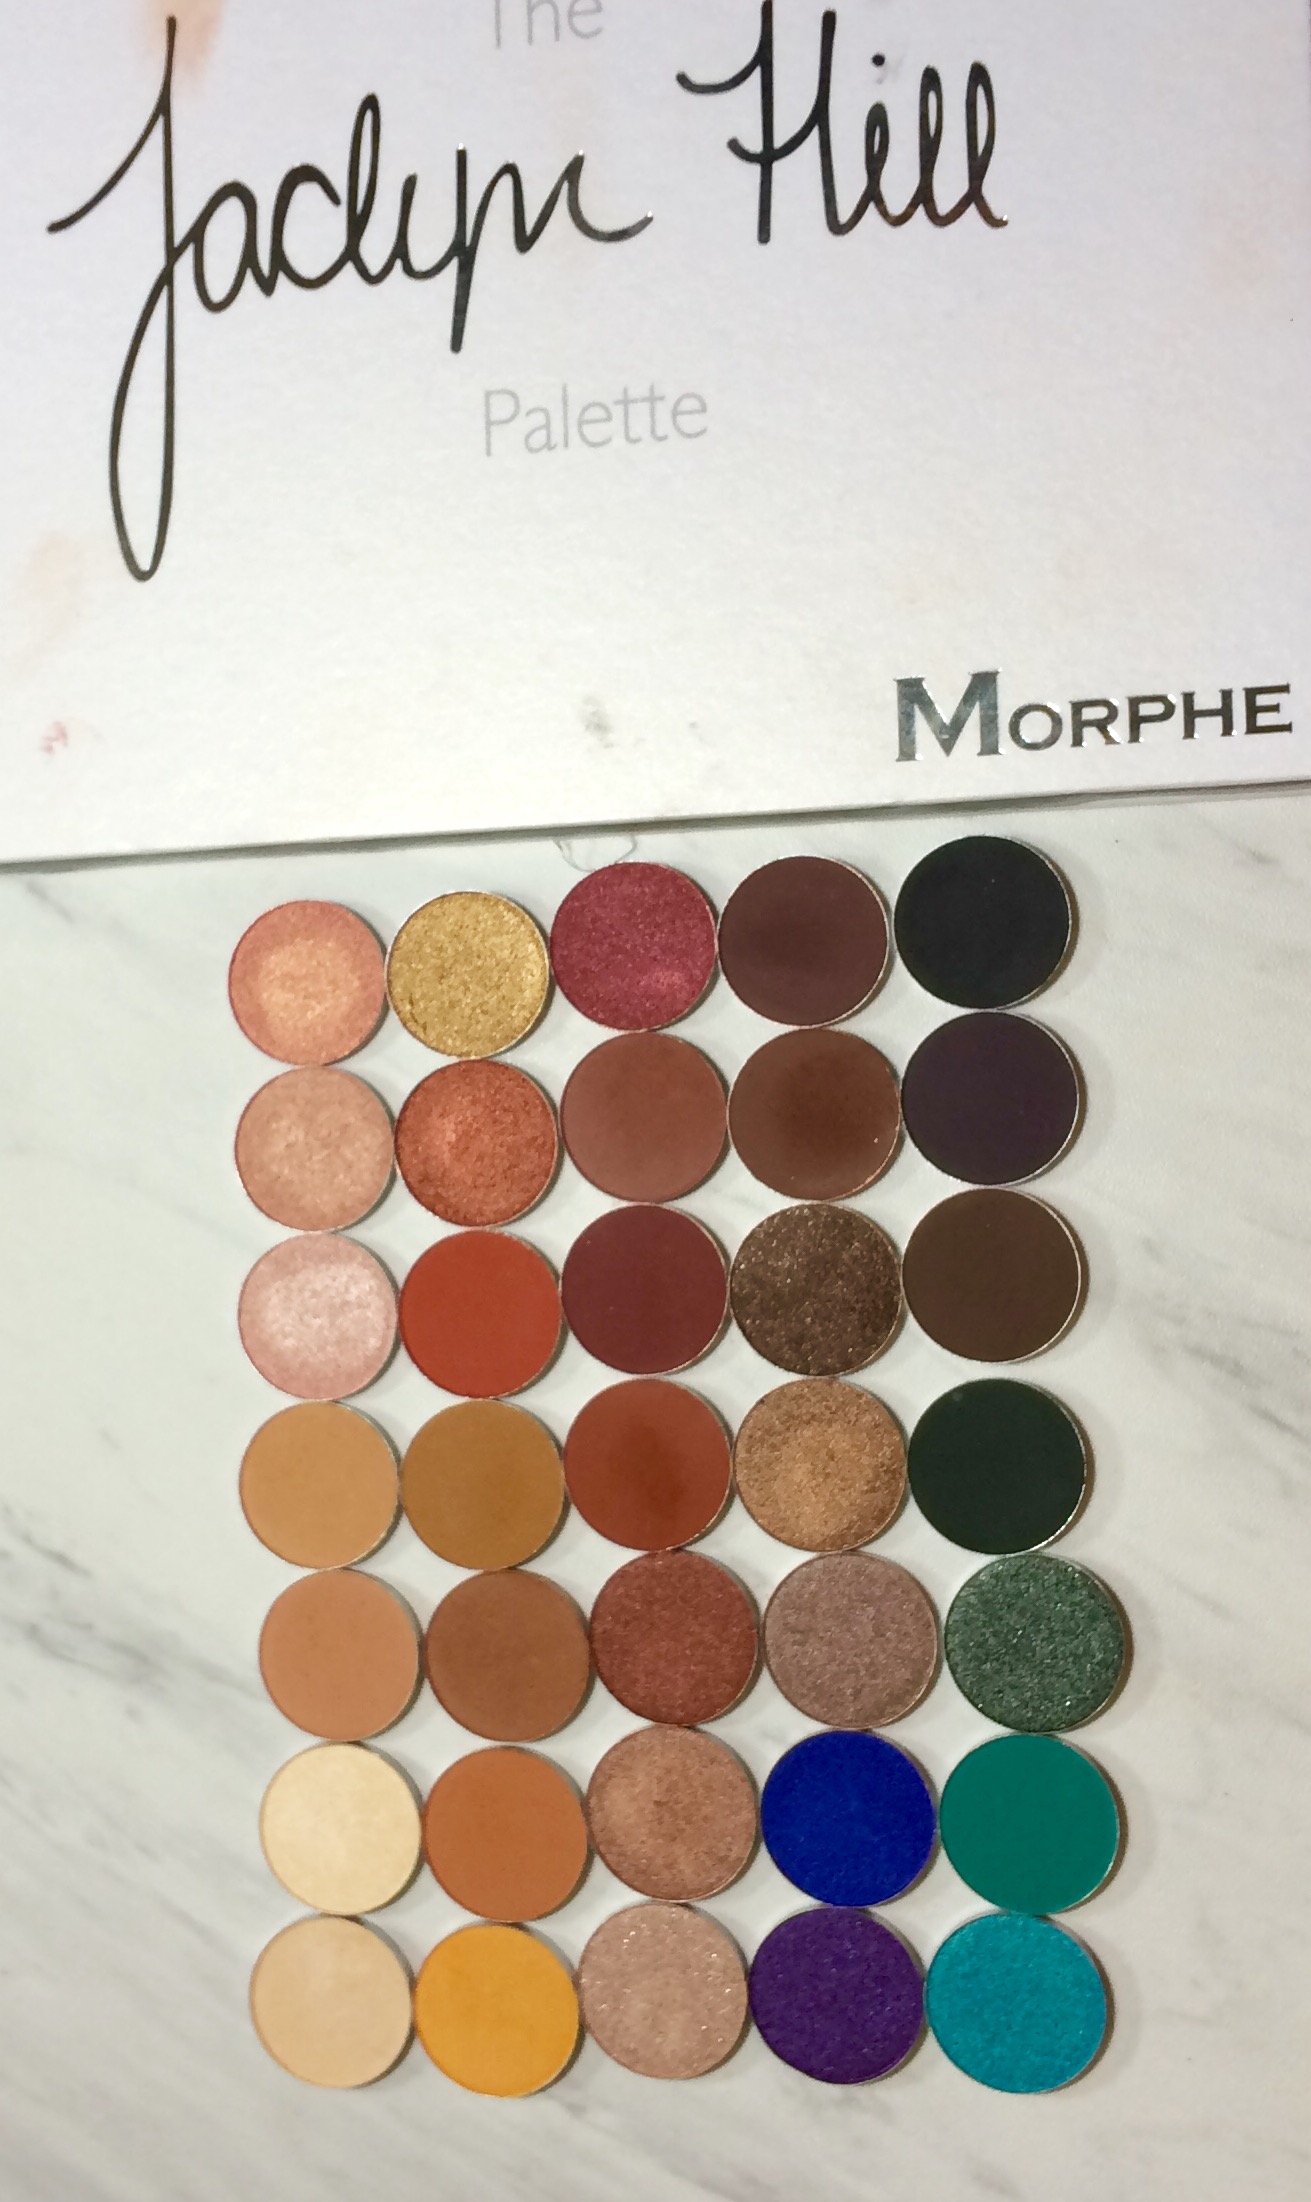 Jaclyn Hill Morphe Palette | Depotting & Thoughts